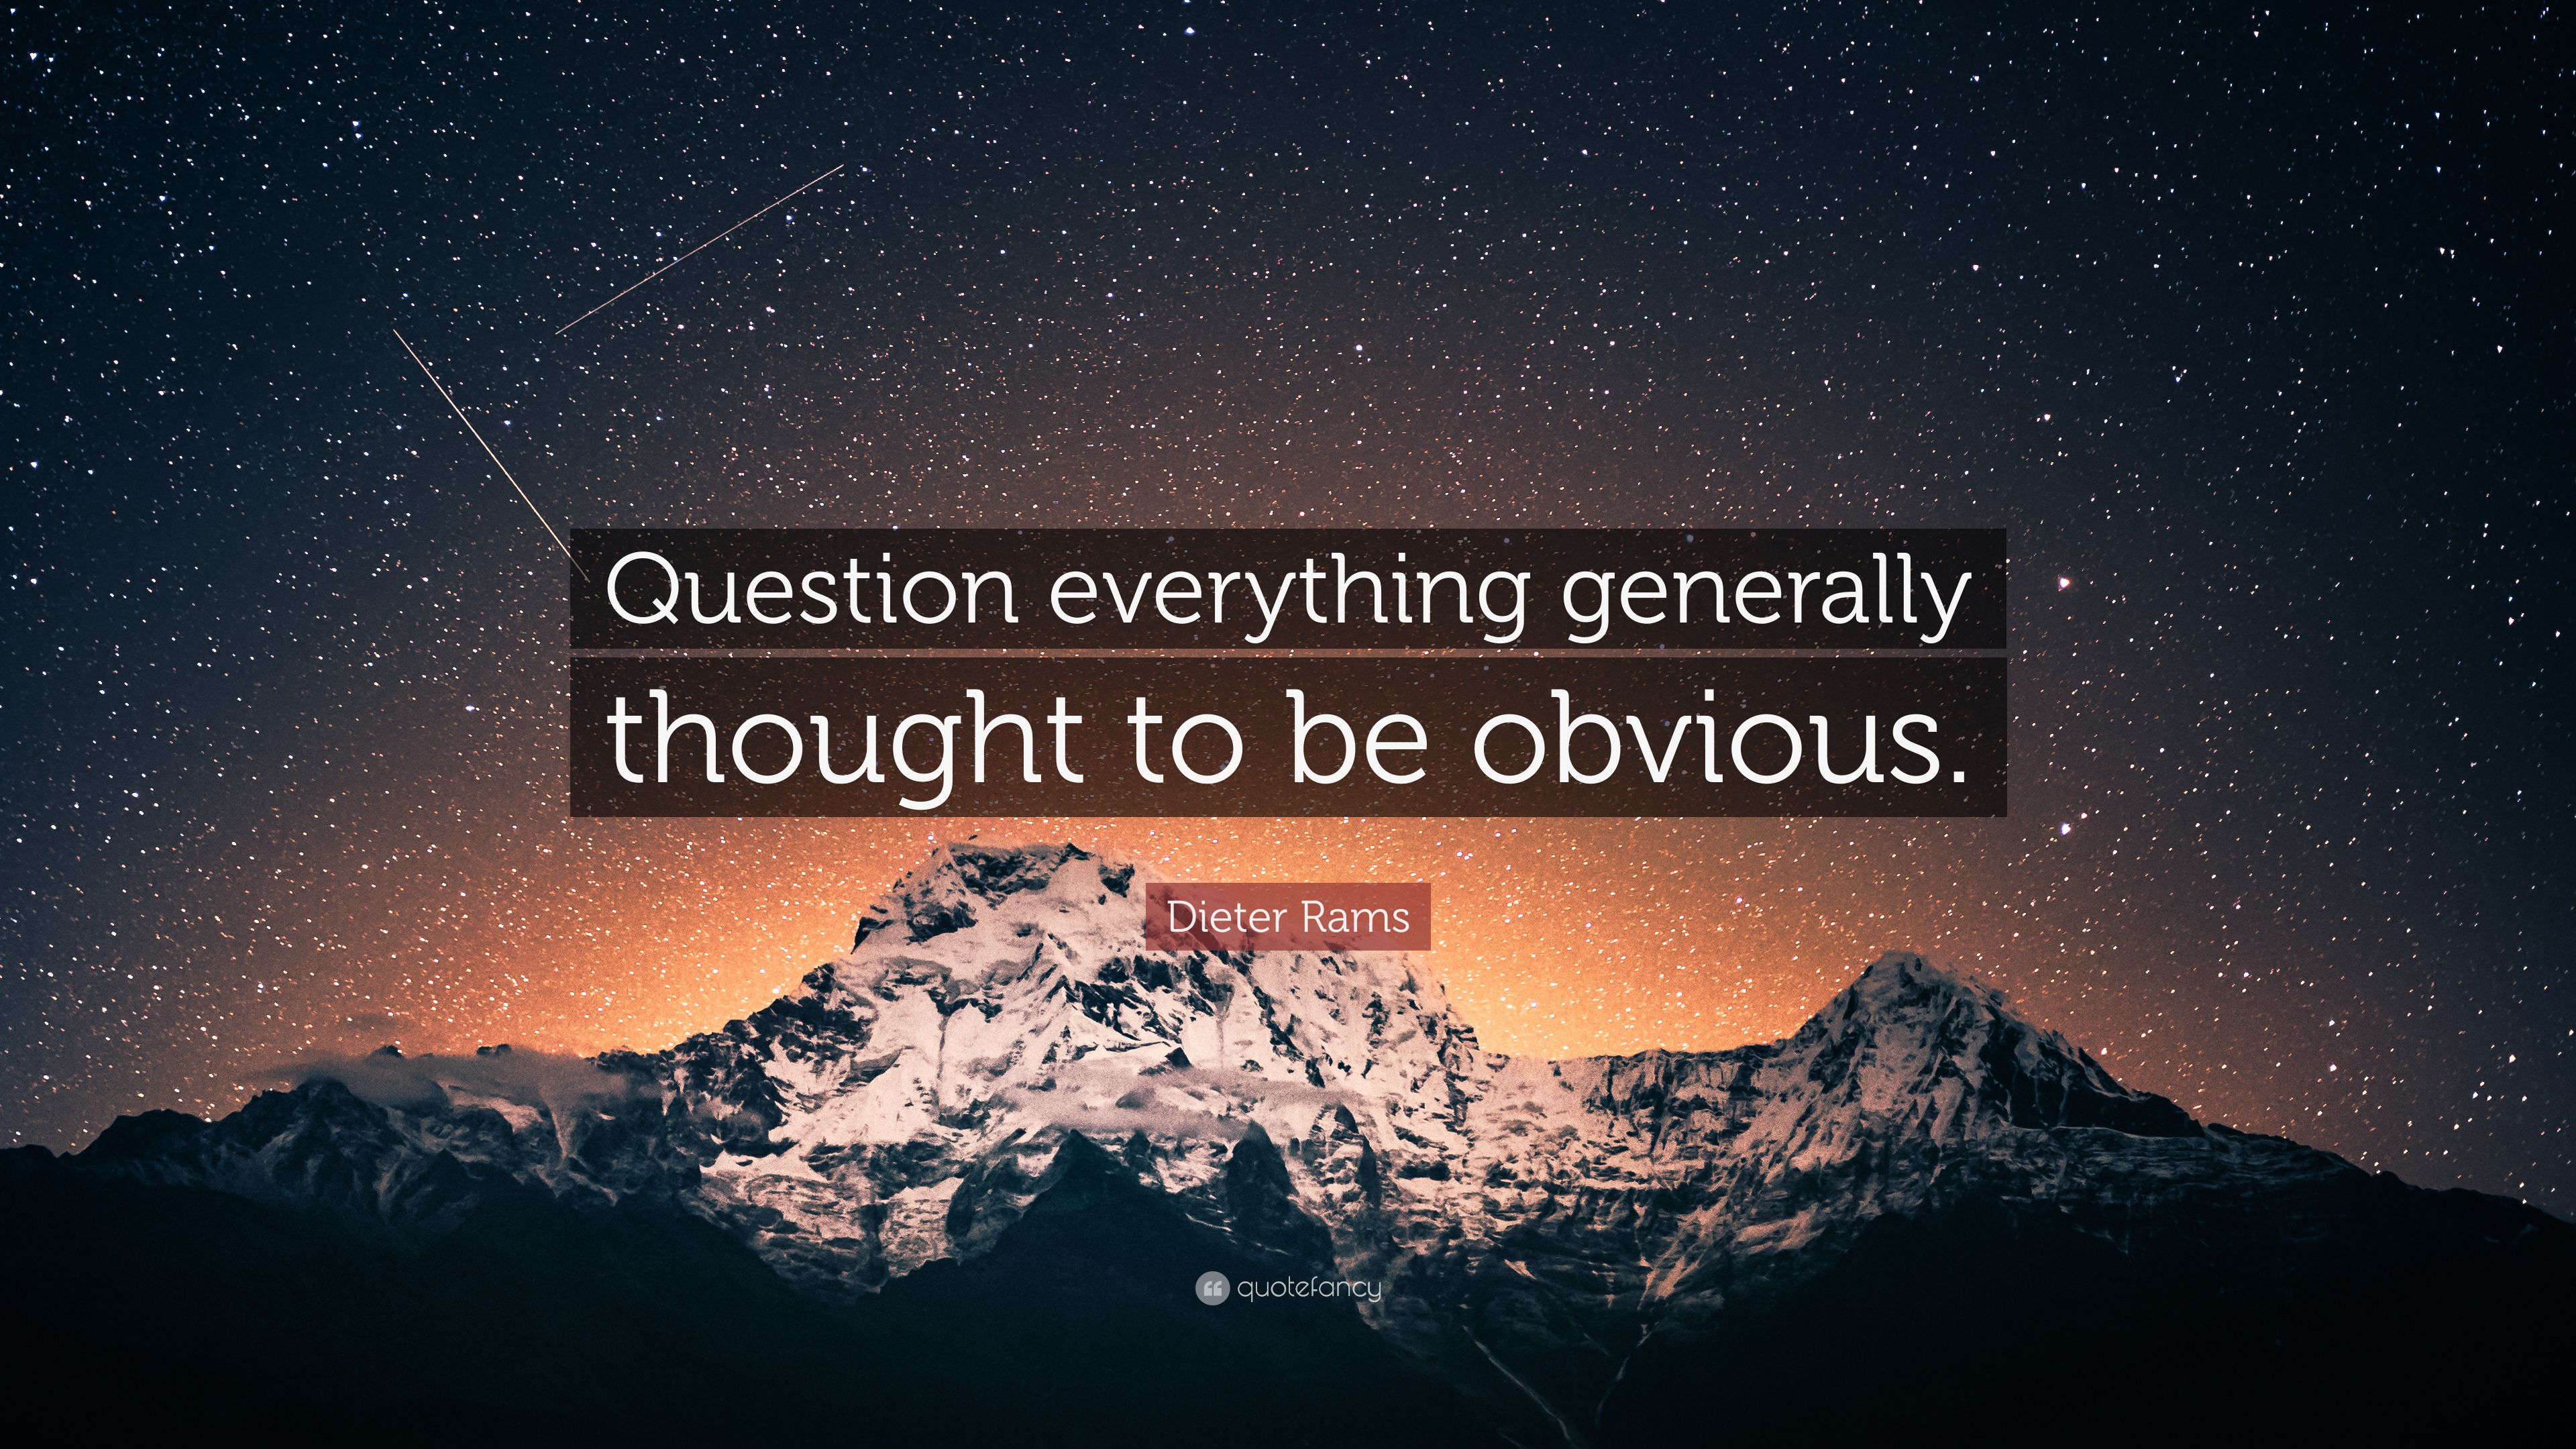 Dieter Rams Quote: “Question everything generally thought to be obvious.” (9 wallpaper)